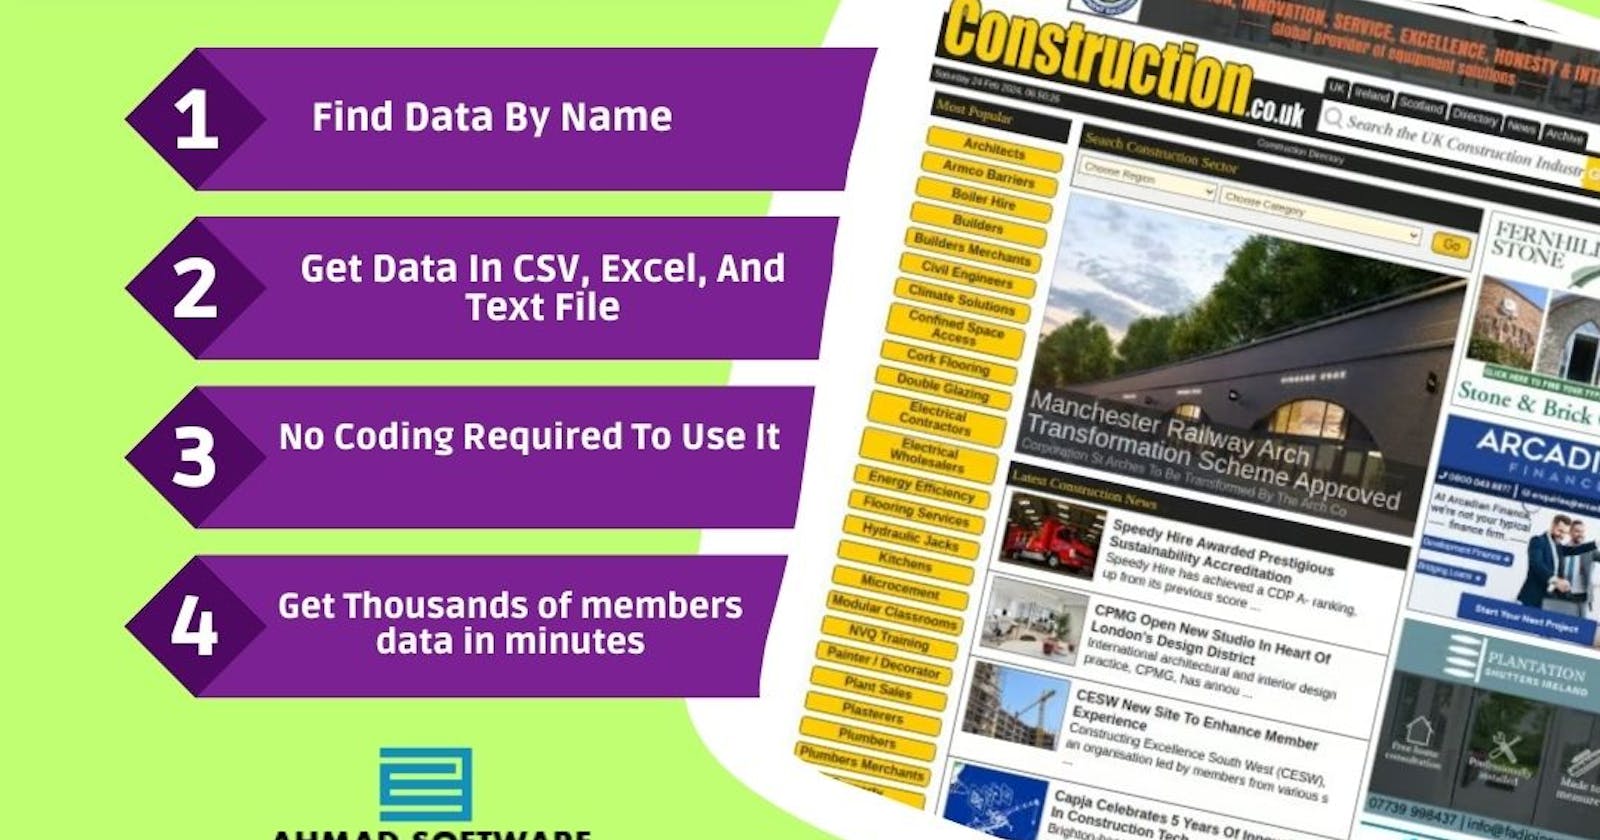 How To Extract Companies Data From Contstruction.co.uk?